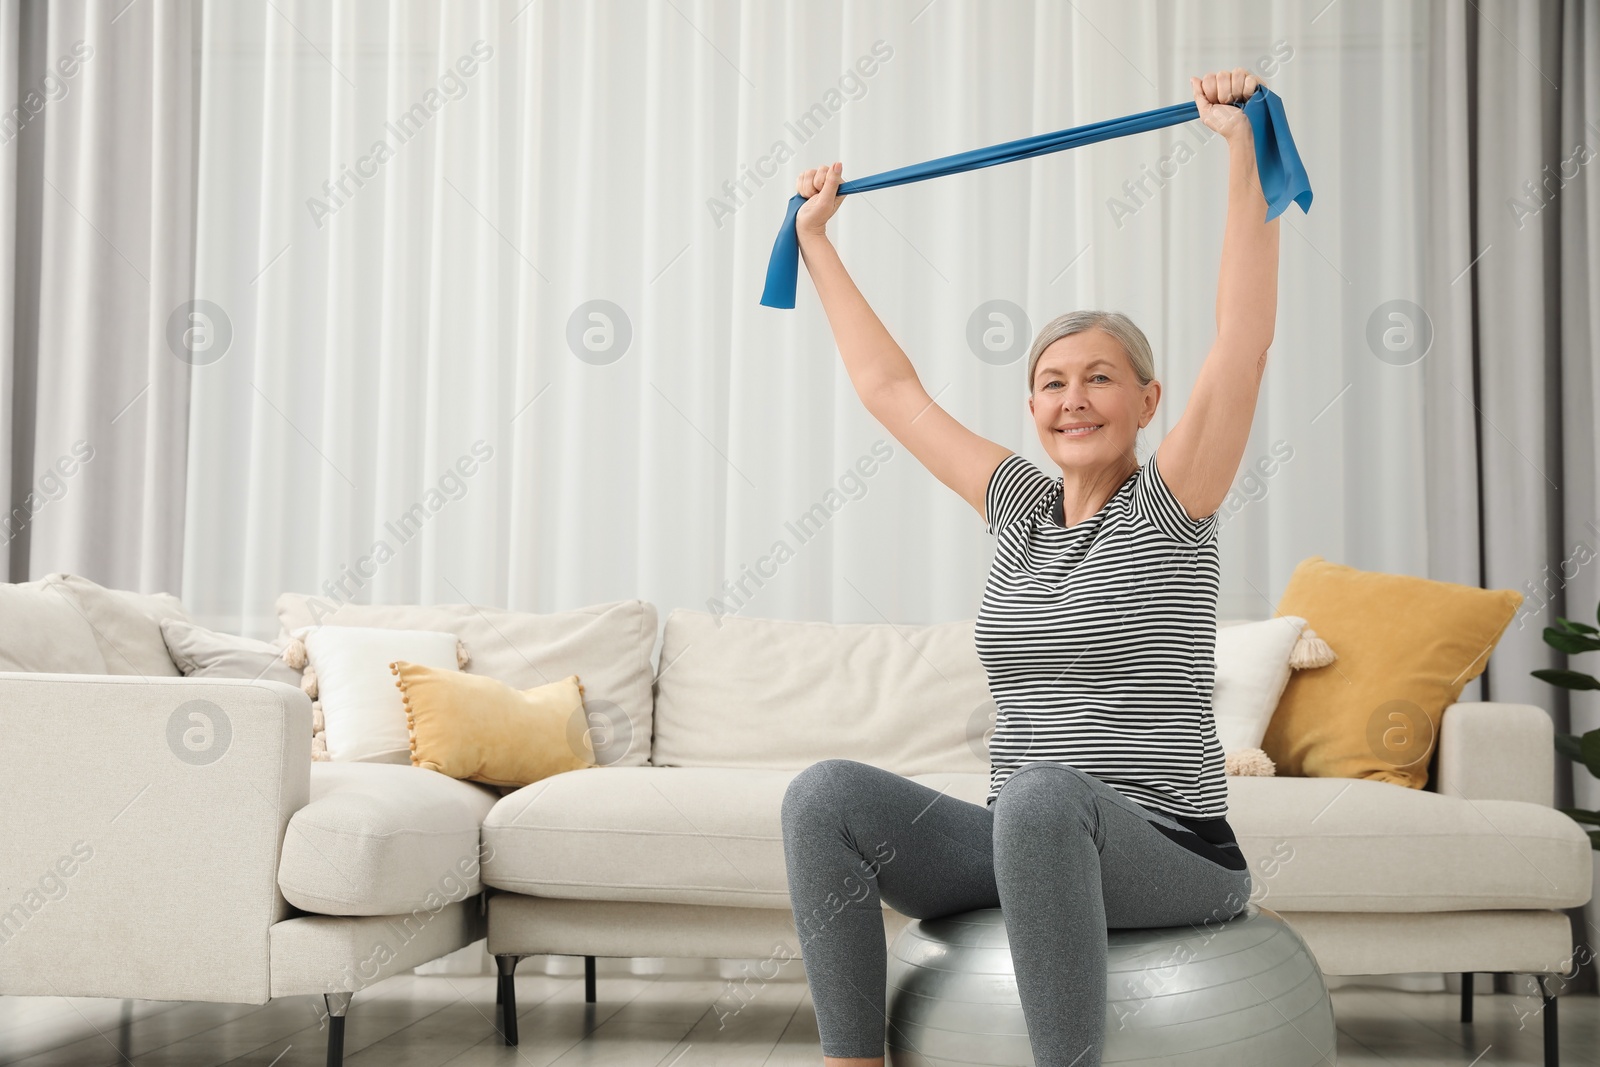 Photo of Senior woman doing exercise with elastic resistance band on fitness ball at home. Space for text